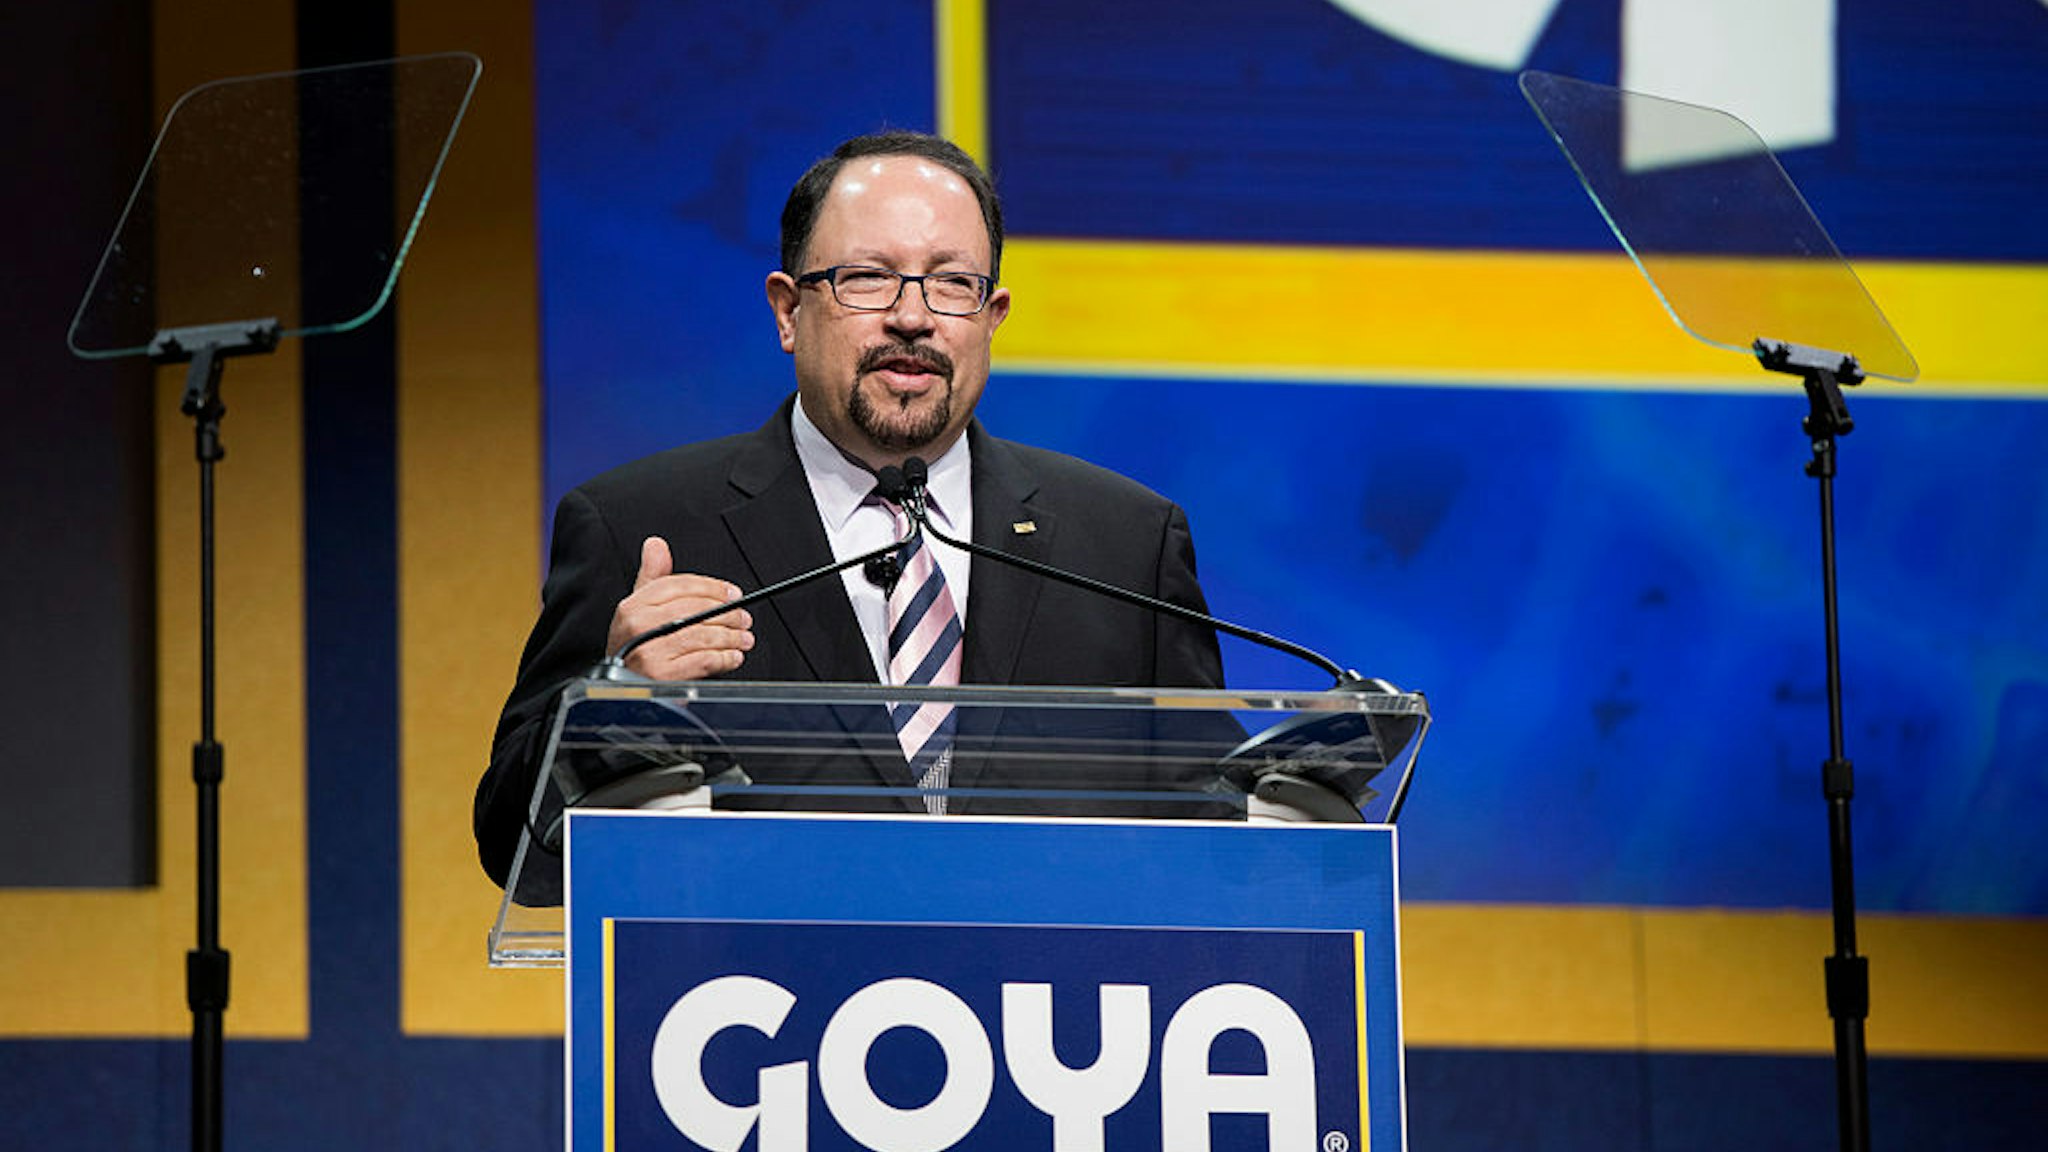 Bob Unanue, president of Goya Foods Inc., speaks at the official ribbon-cutting ceremony for the new Goya Foods Inc. corporate headquarters in Jersey City, New Jersey, U.S.